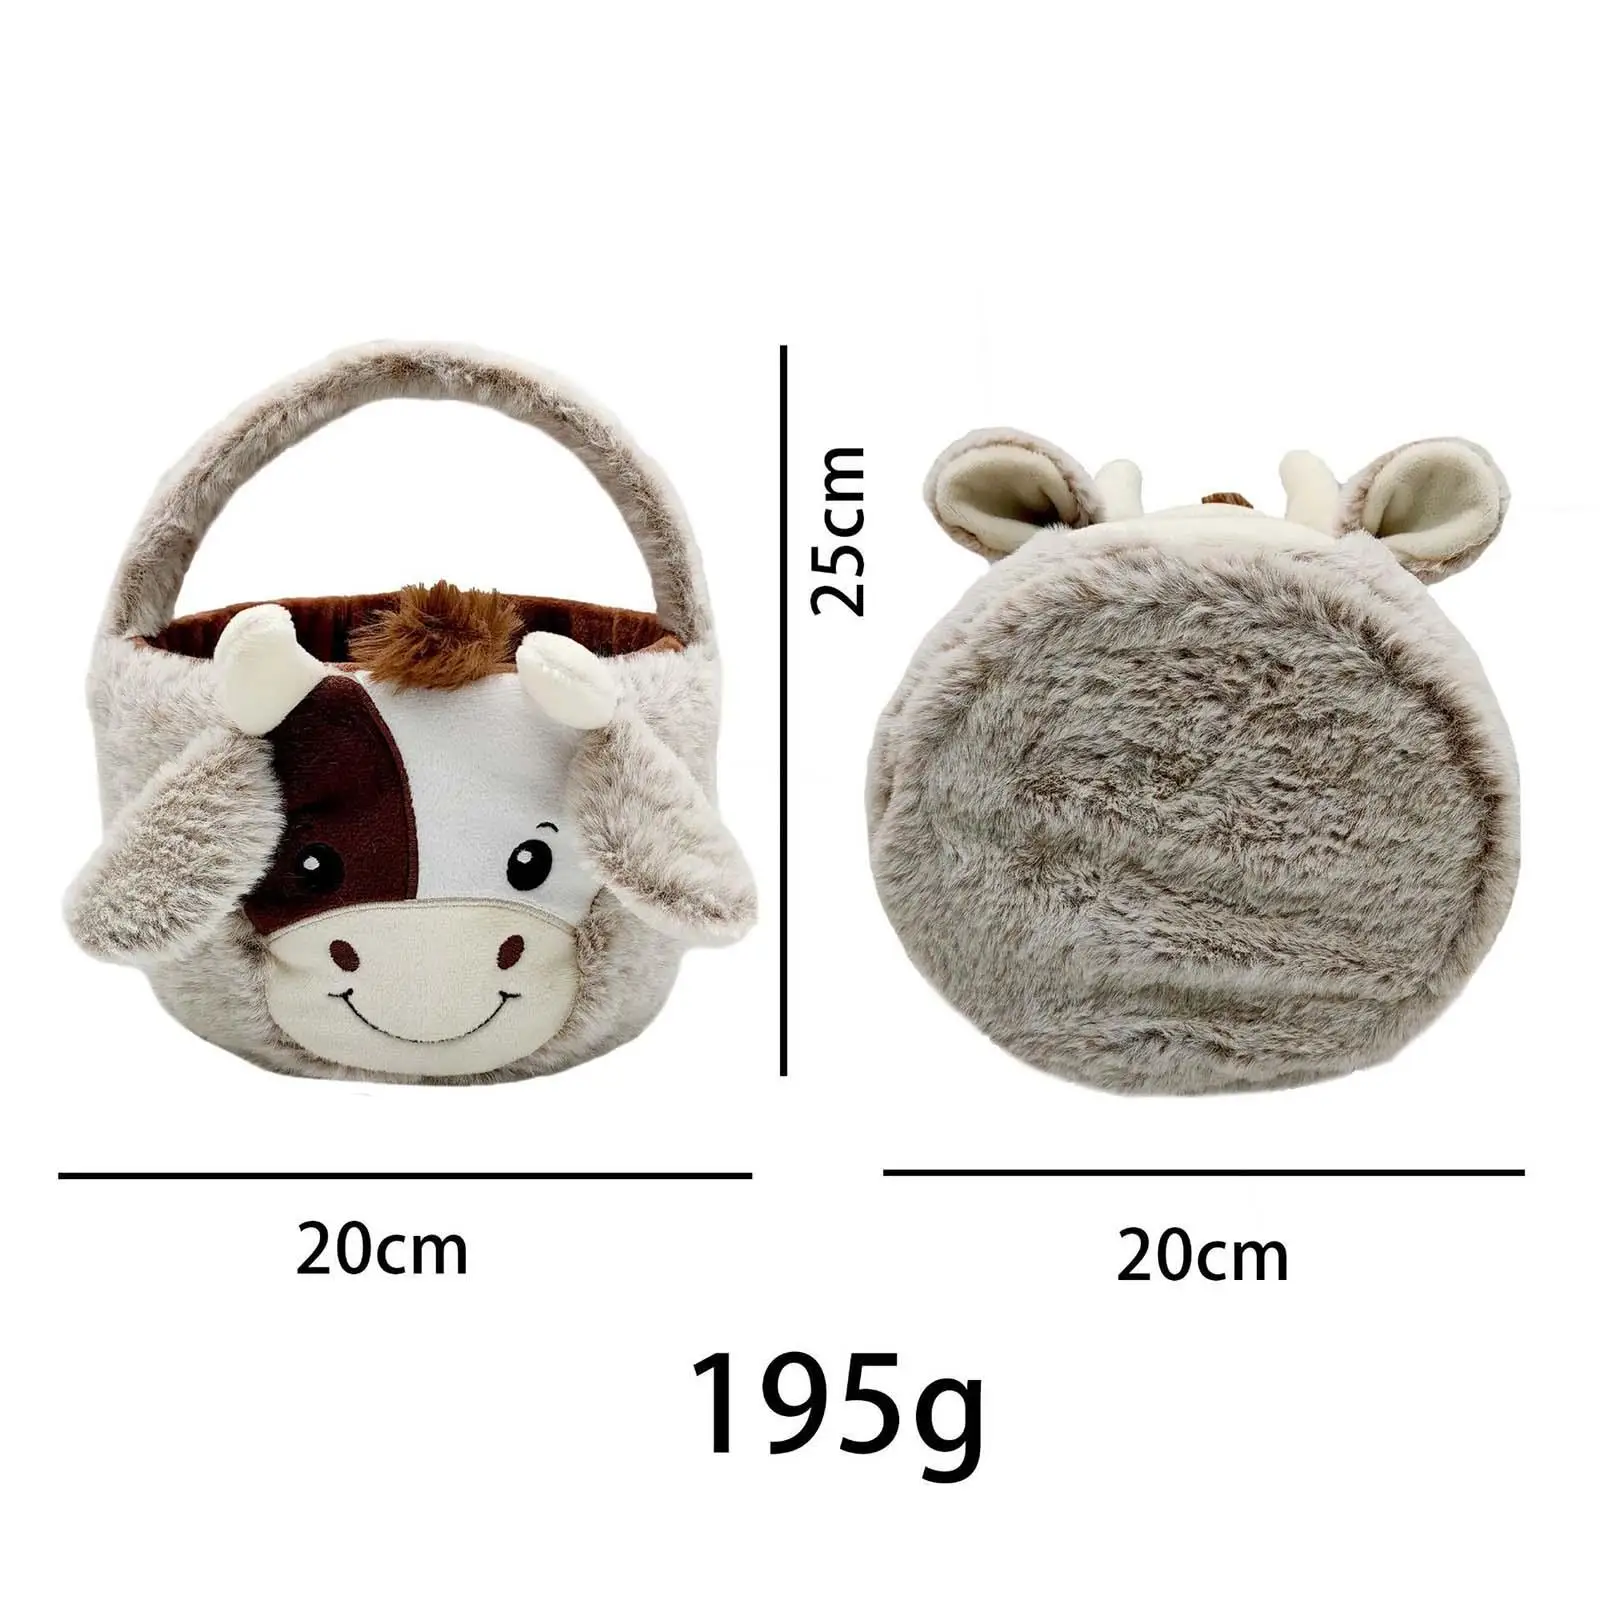 Cute Plush Cow Easter Basket Easter Egg Finding Toys Storage Candy Gifts Bag Reusable for Spring Candies Birthday Decor Kids